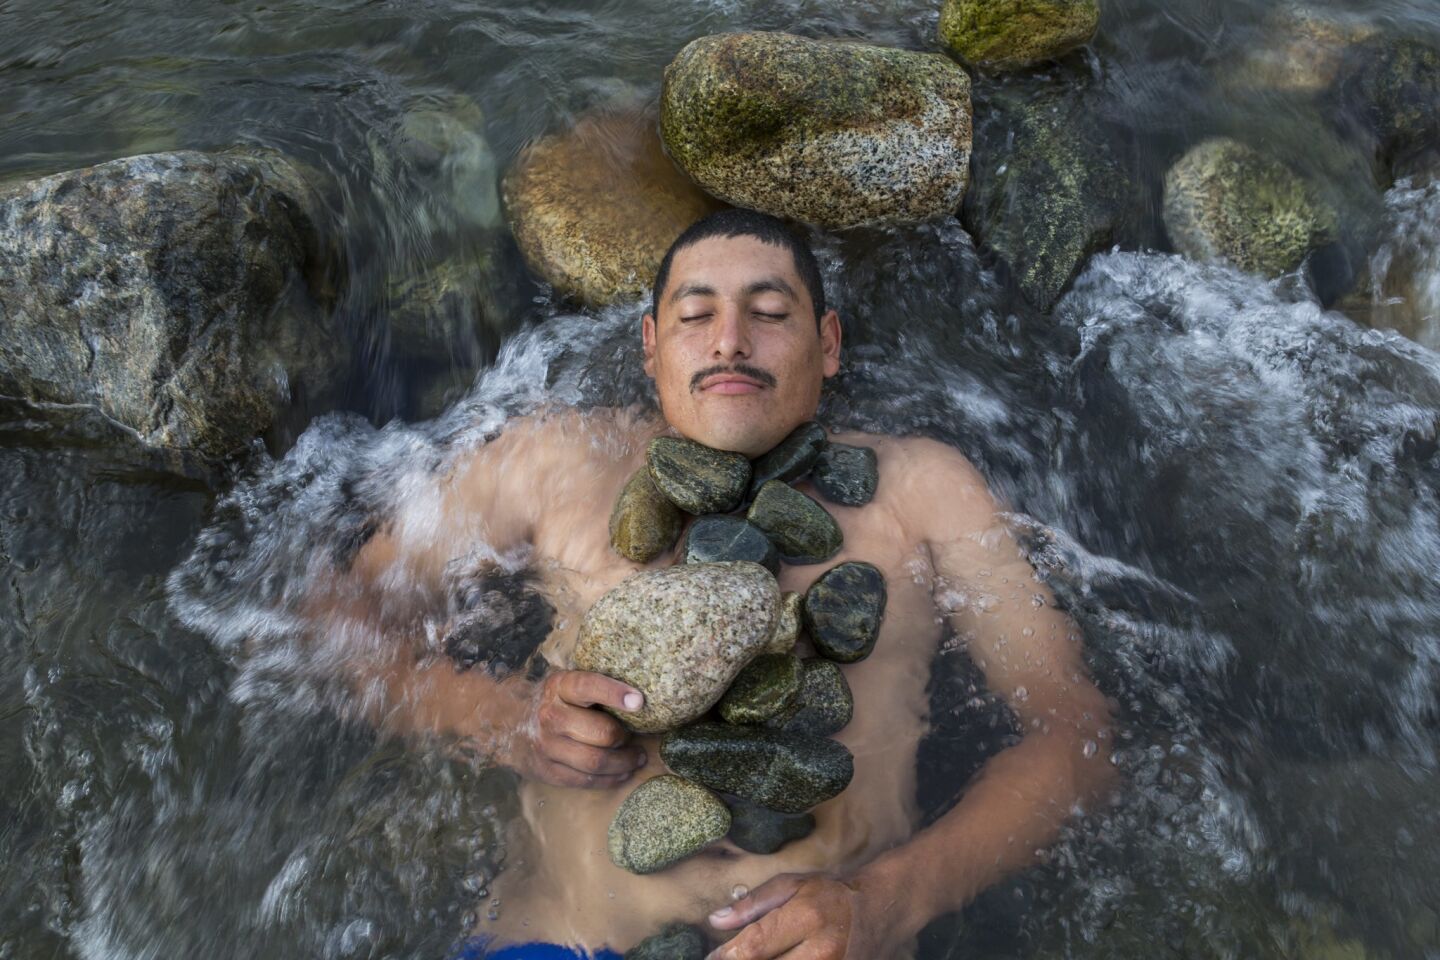 Melvin Marquez from Honduras, relaxes after having a bath in a river in Pijijiapan, Mexico.